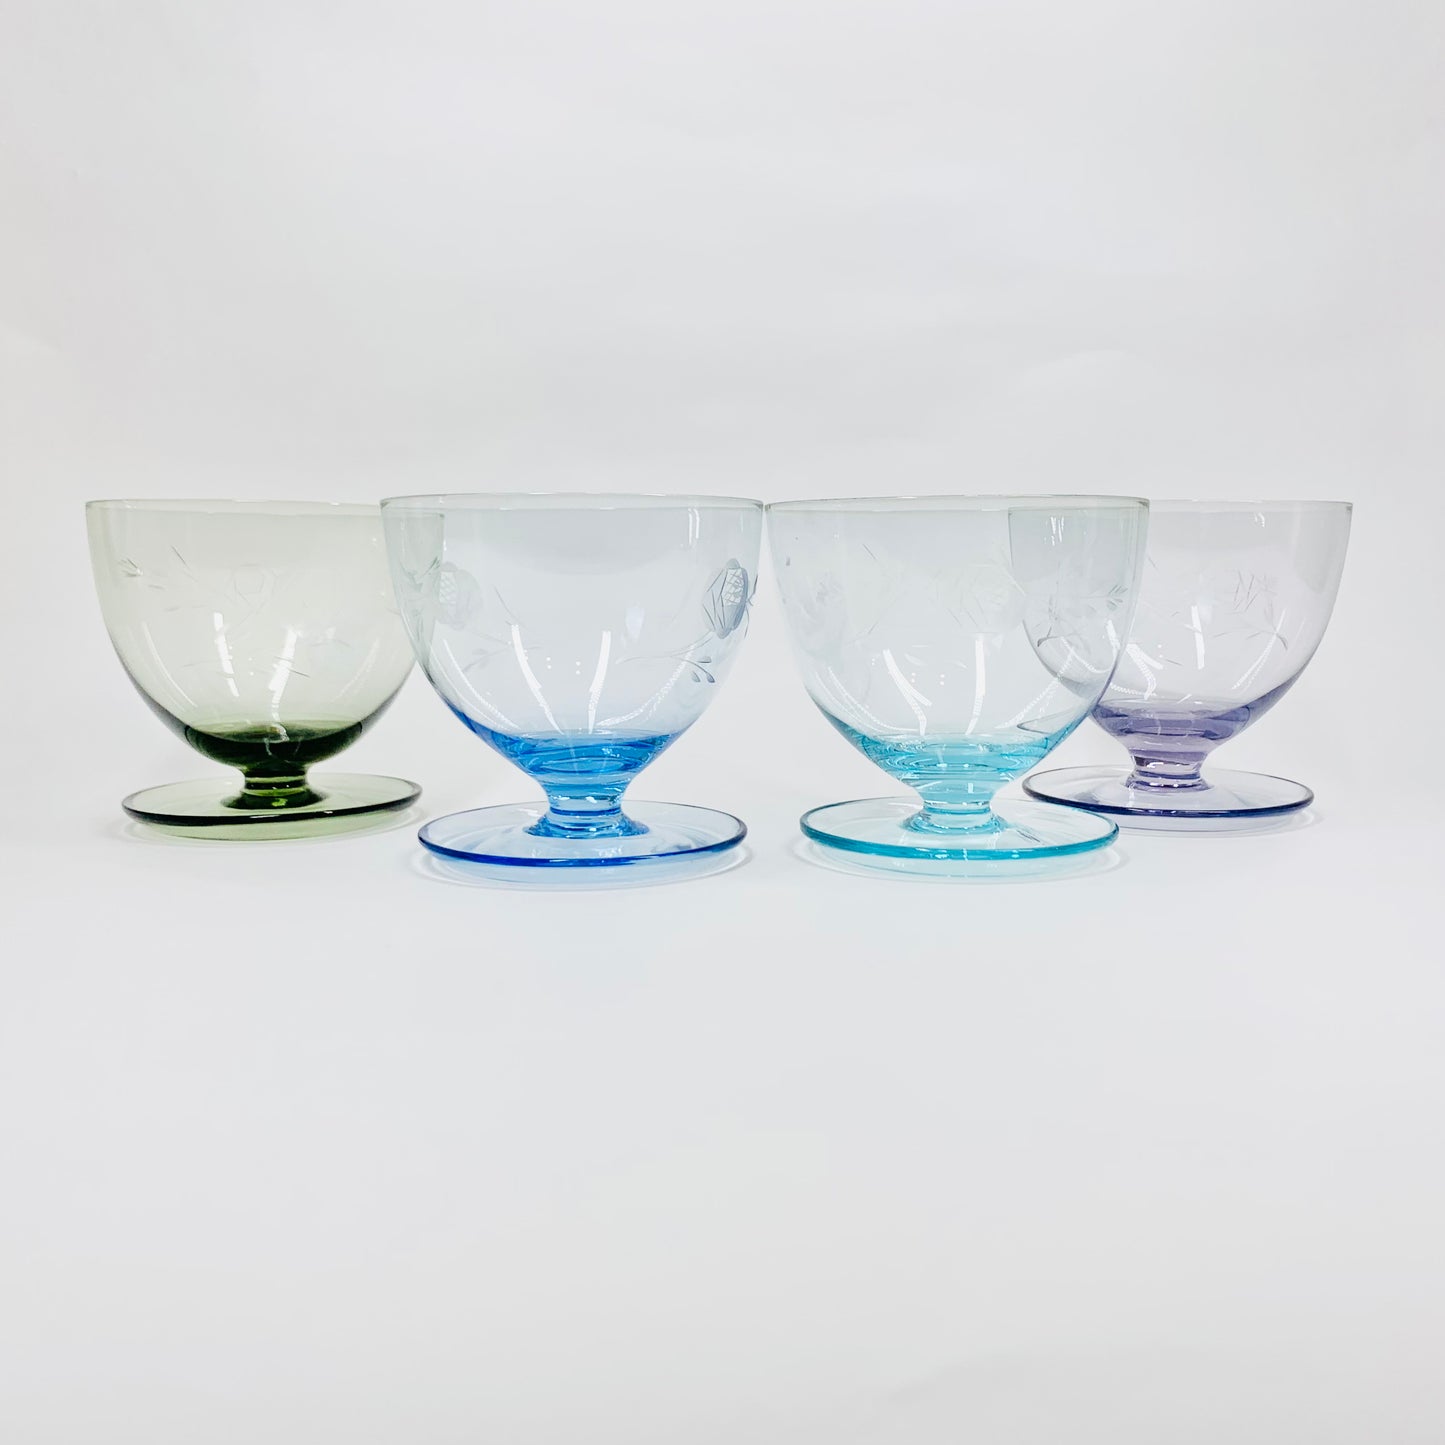 Rare Midcentury hand etched harlequin coupe/dessert glasses